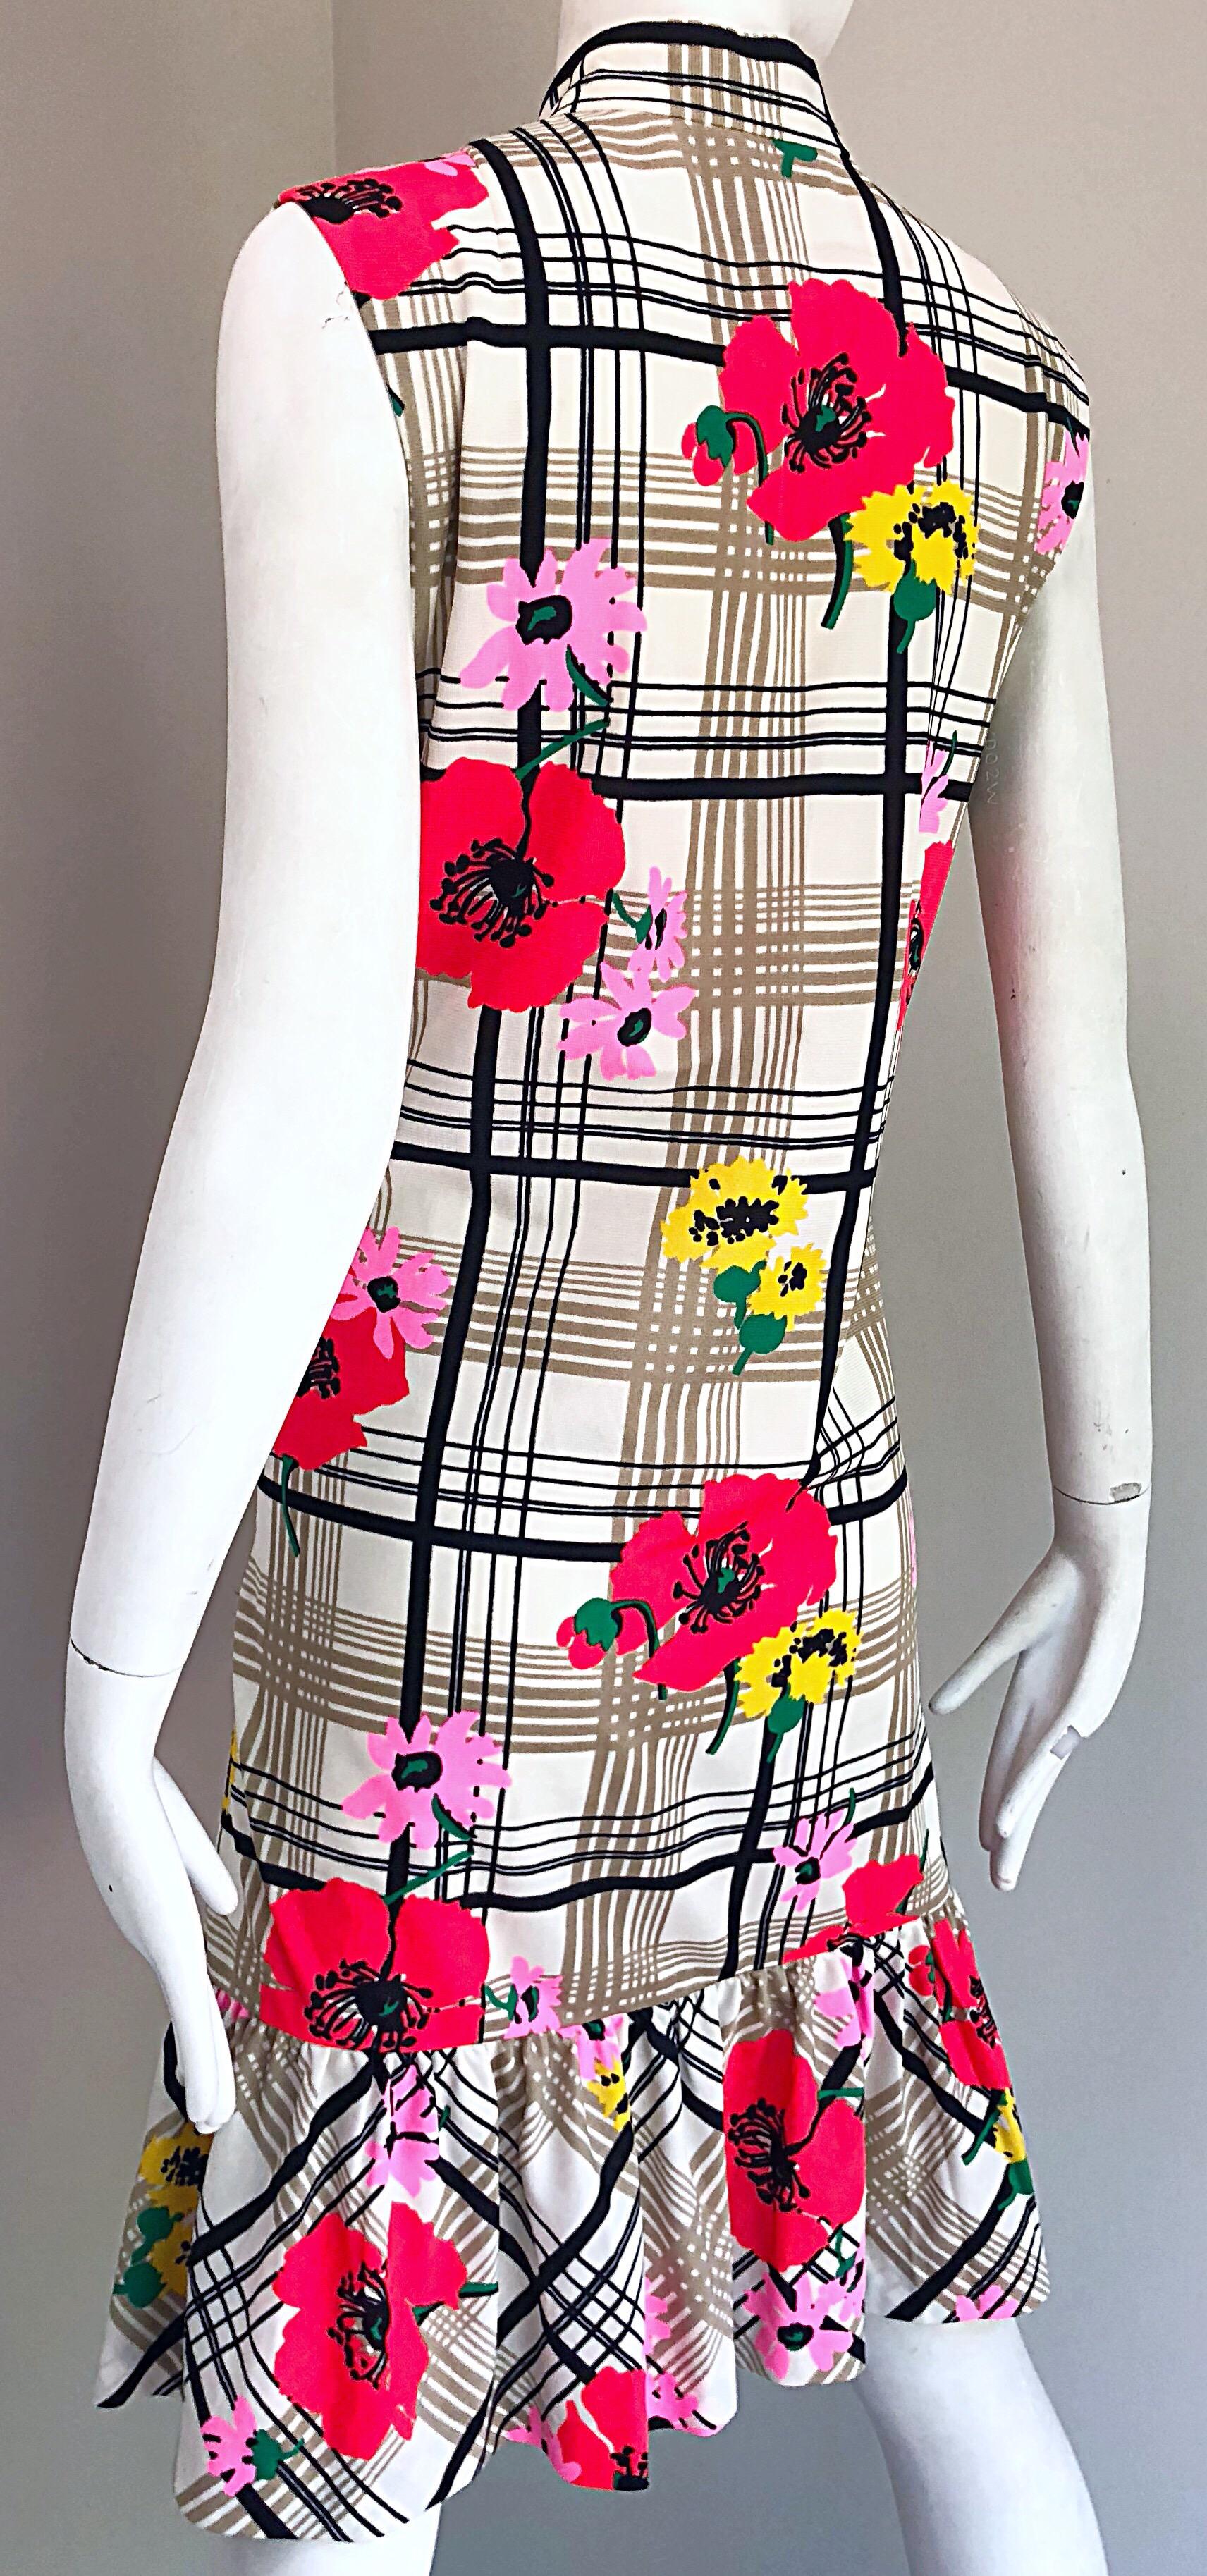 Chic 1960s Stripes and Flowers Black and White Colorful Vintage 60s Shift Dress 1